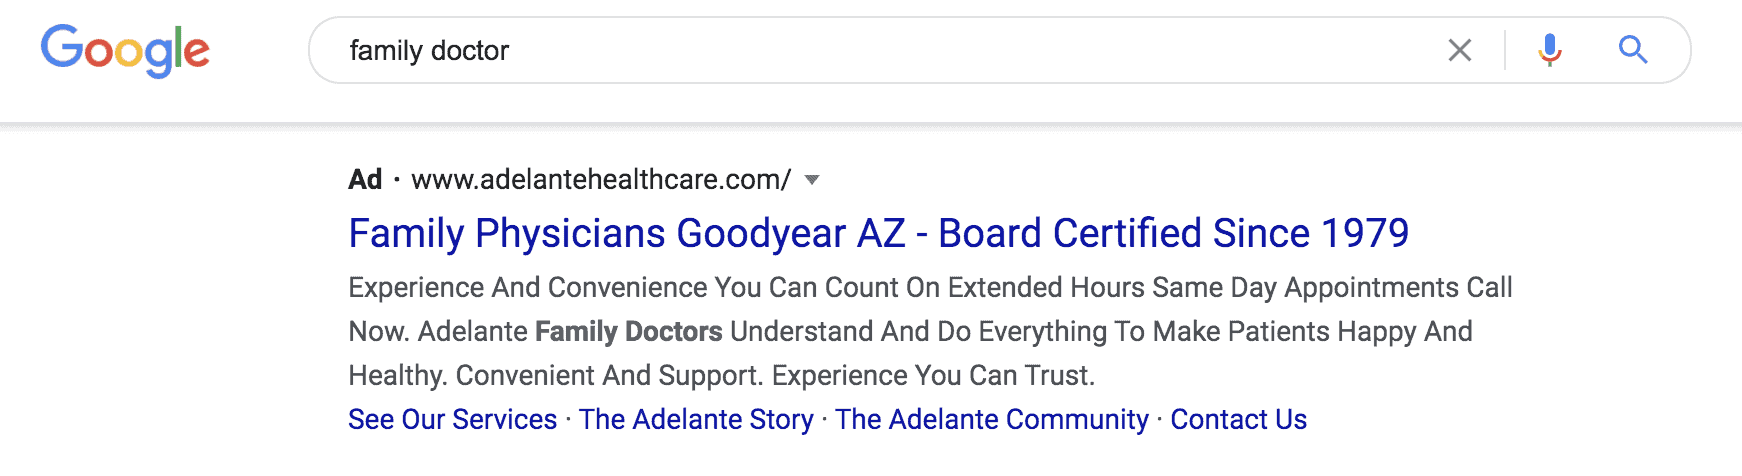 ads for healthcare